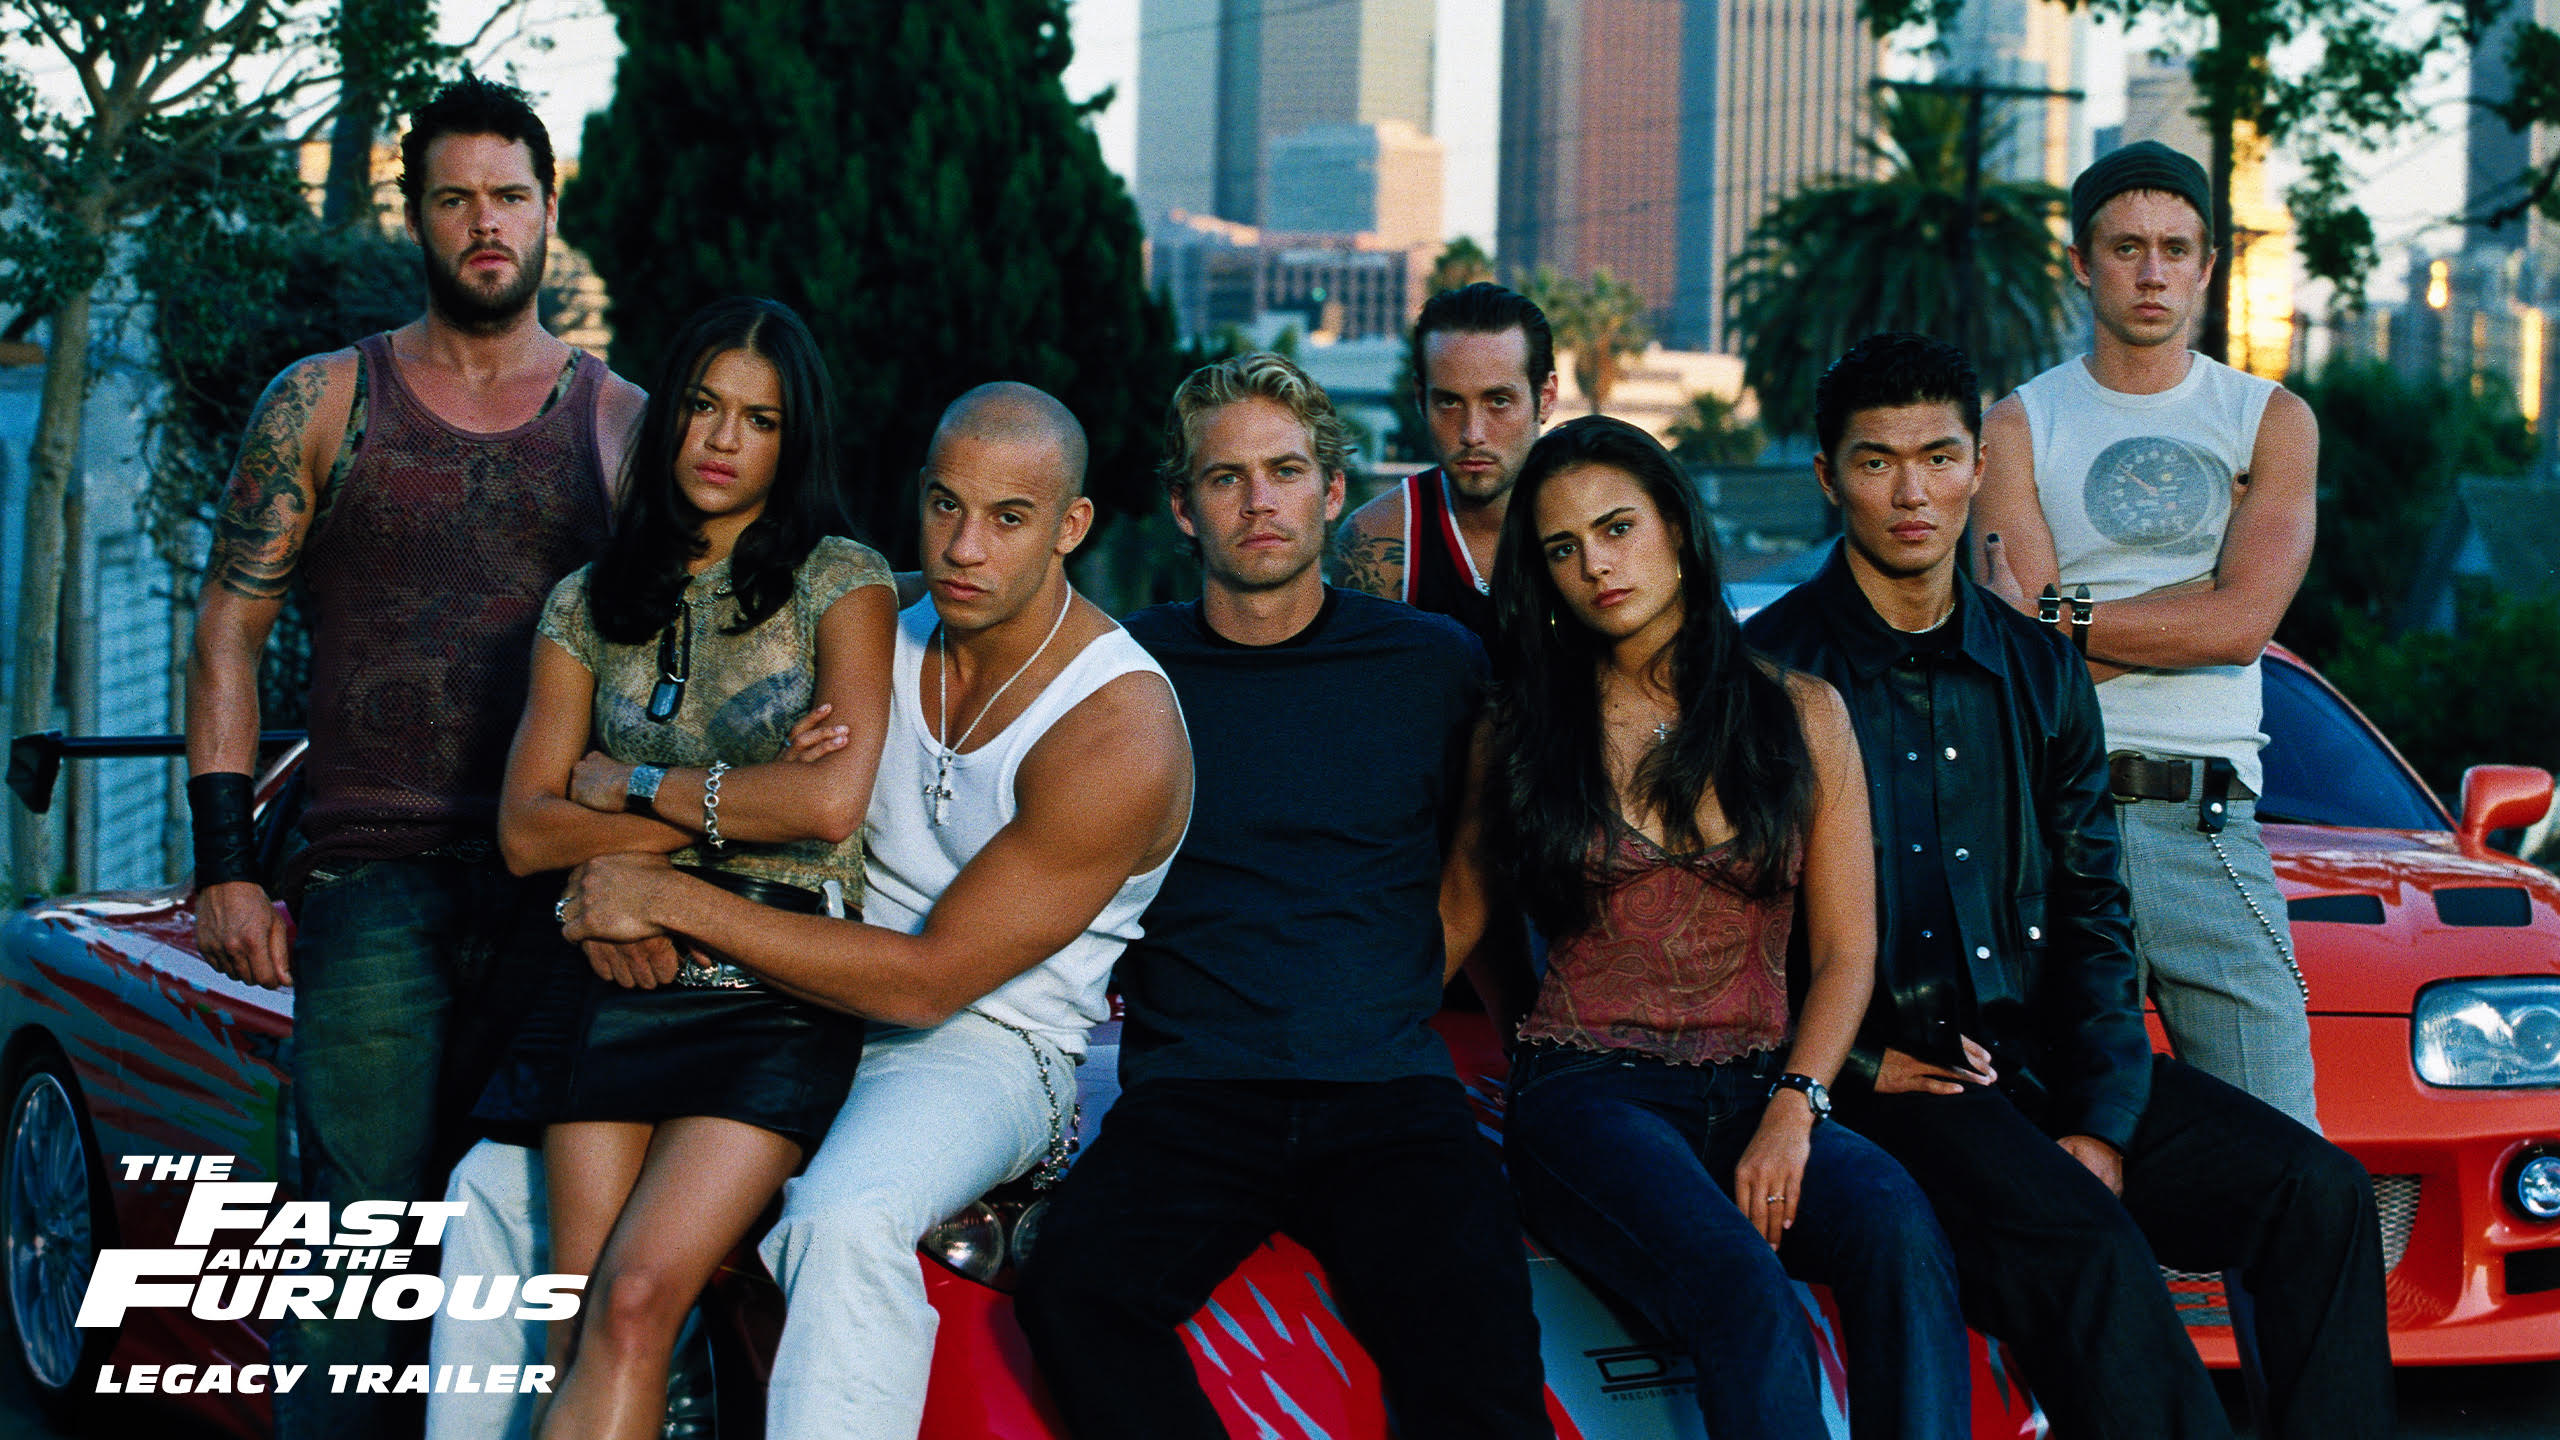 The Fast and the Furious Legacy Trailer Relives on What Started It All